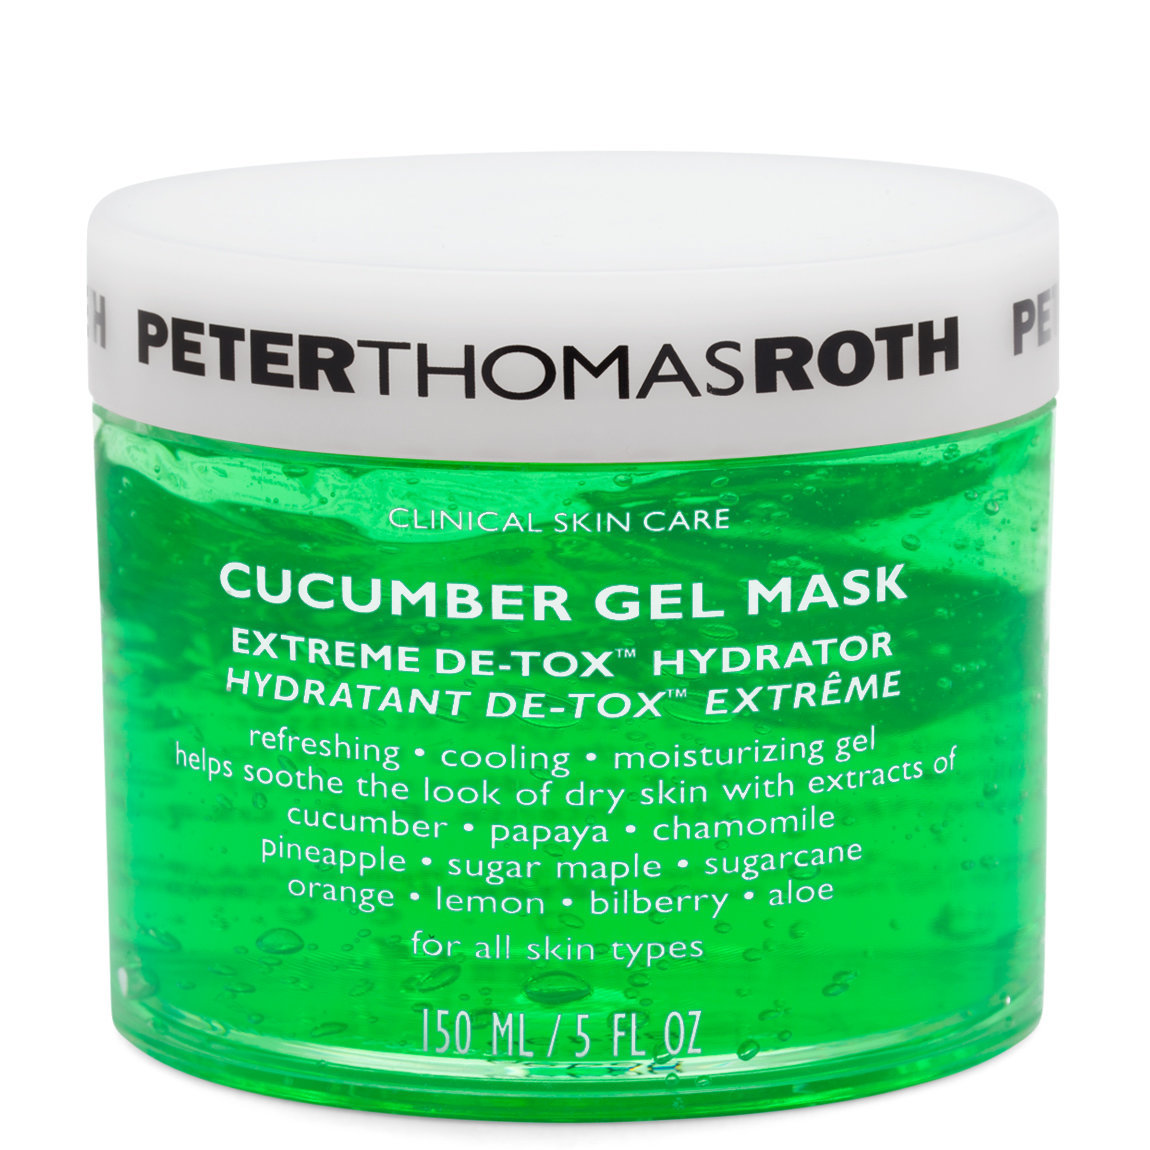 Peter Thomas Roth Cucumber Gel Mask Extreme De-tox Hydrator alternative view 1 - product swatch.